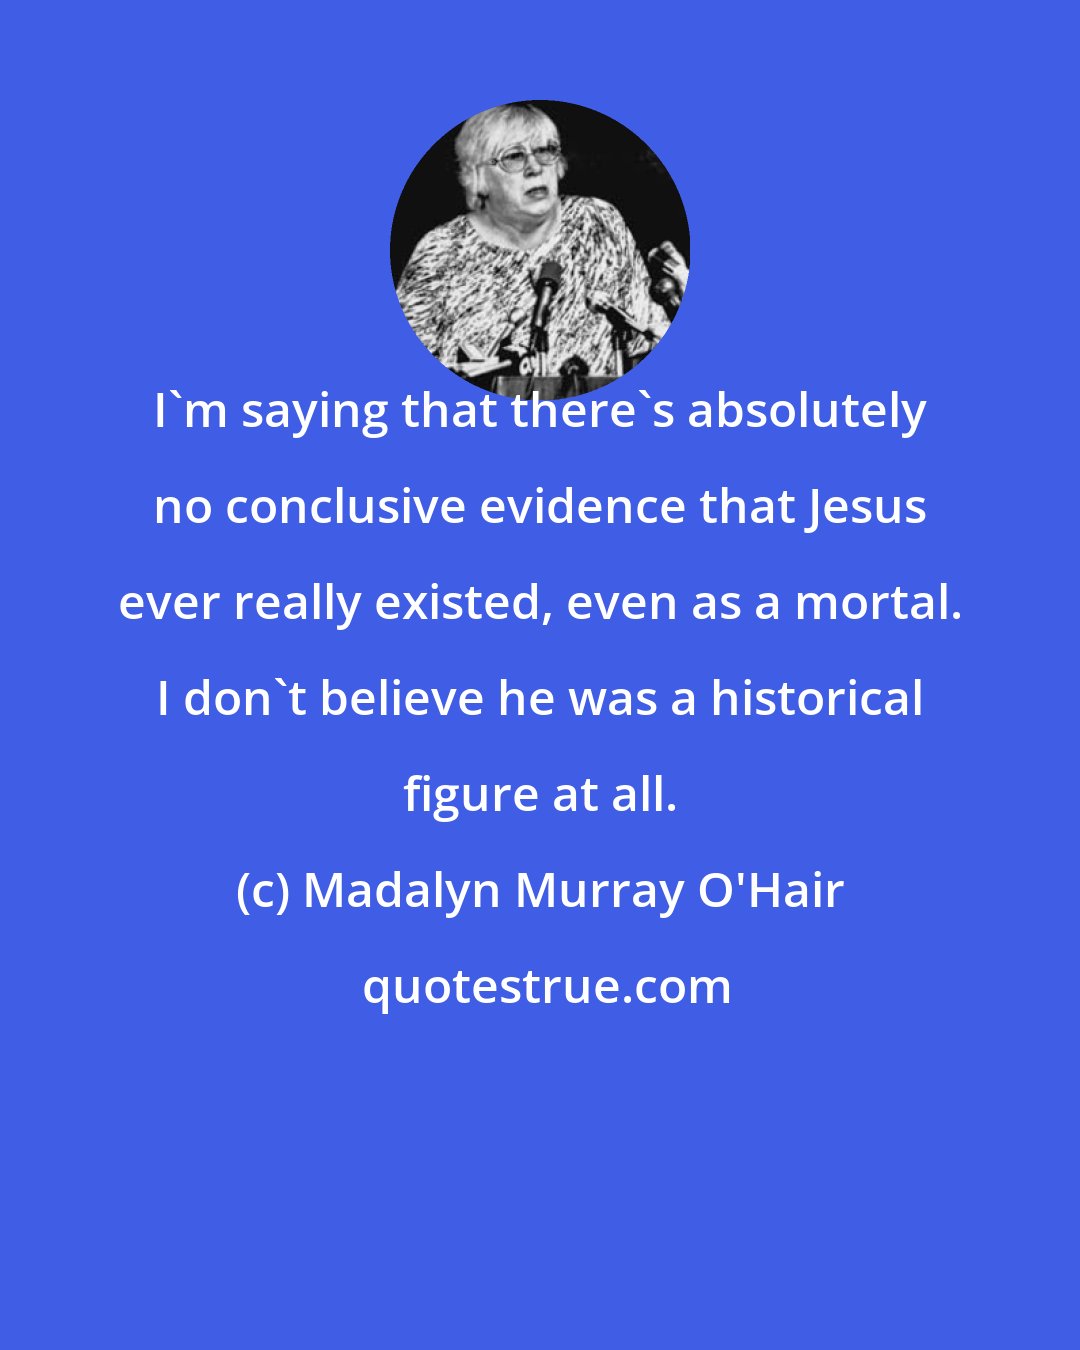 Madalyn Murray O'Hair: I'm saying that there's absolutely no conclusive evidence that Jesus ever really existed, even as a mortal. I don't believe he was a historical figure at all.